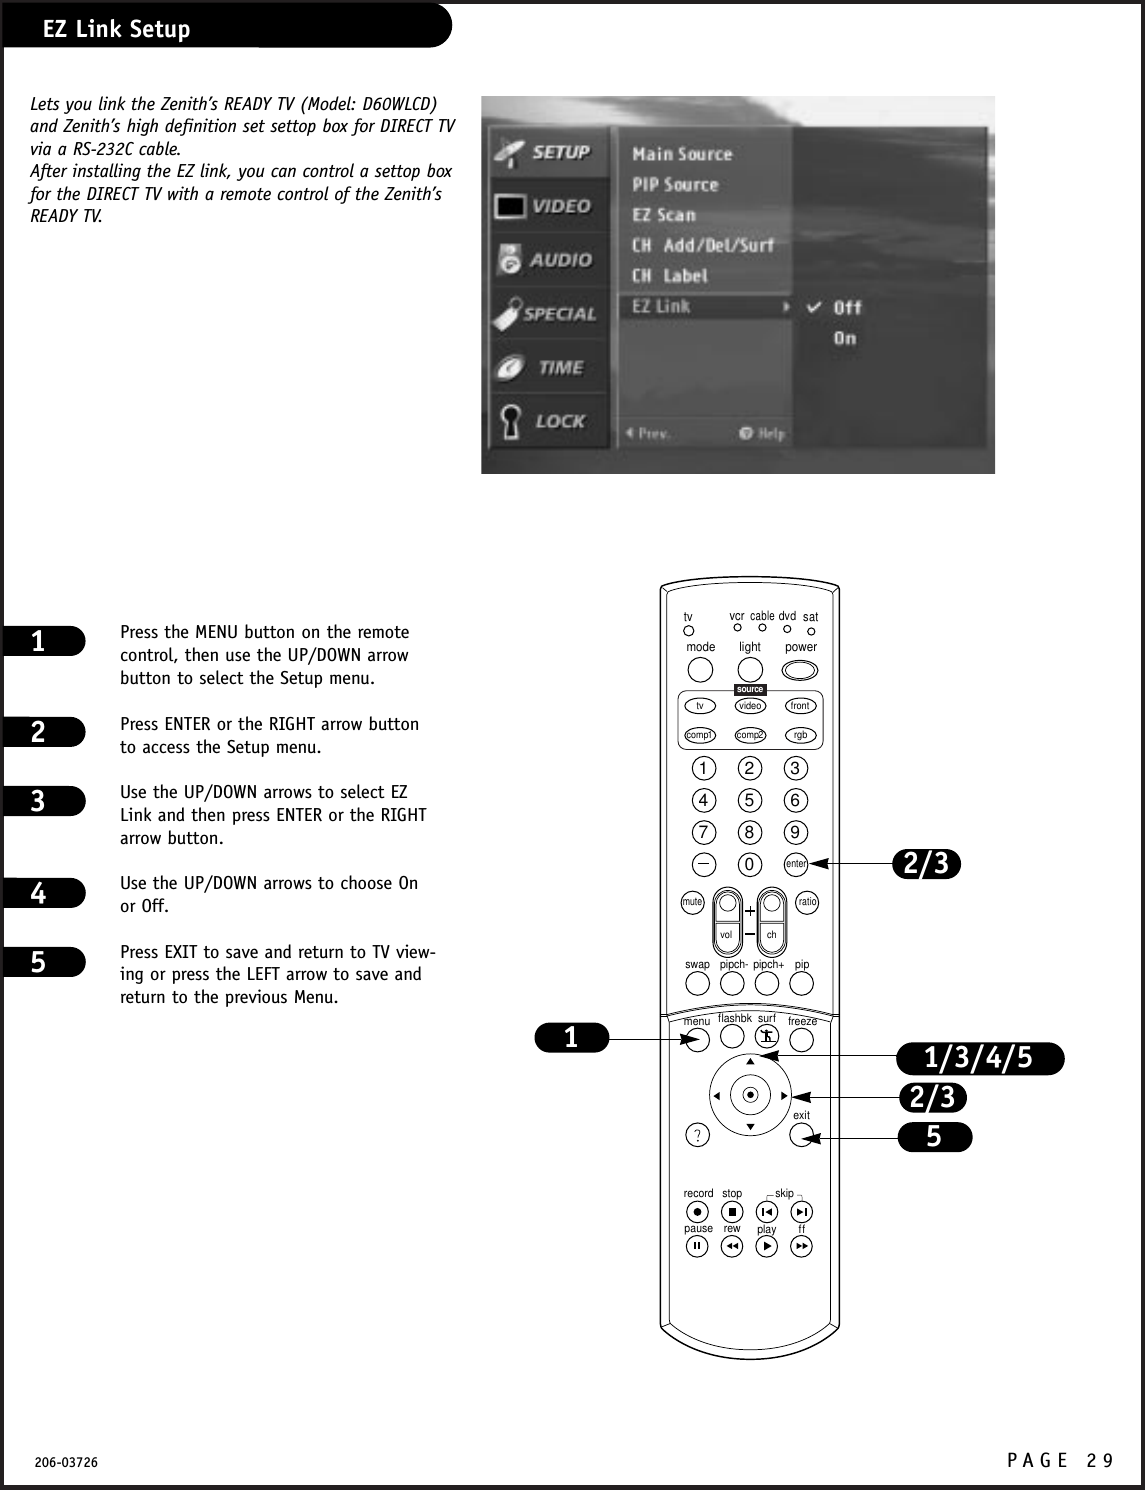 P A GE 29206-03726EZ Link SetupPress the MENU button on the remotecontrol, then use the UP/DOWN arrowbutton to select the Setup menu.Press ENTER or the RIGHT arrow buttonto access the Setup menu.Use the UP/DOWN arrows to select EZLink and then press ENTER or the RIGHTarrow button.Use the UP/DOWN arrows to choose Onor Off.Press EXIT to save and return to TV view-ing or press the LEFT arrow to save andreturn to the previous Menu.123451234567890tvmode light power   tv video frontcomp1 rgbvcrcabledvdsatmuteswap pipch- pipch+ pipmenurecord stoppause rew play ffexitflashbk surf freezevol chratiocomp2skipsourceenter1/3/4/52/3152/3Lets you link the Zenith’s READY TV (Model: D60WLCD)and Zenith’s high definition set settop box for DIRECT TVvia a RS-232C cable.After installing the EZ link, you can control a settop boxfor the DIRECT TV with a remote control of the Zenith’sREADY TV.